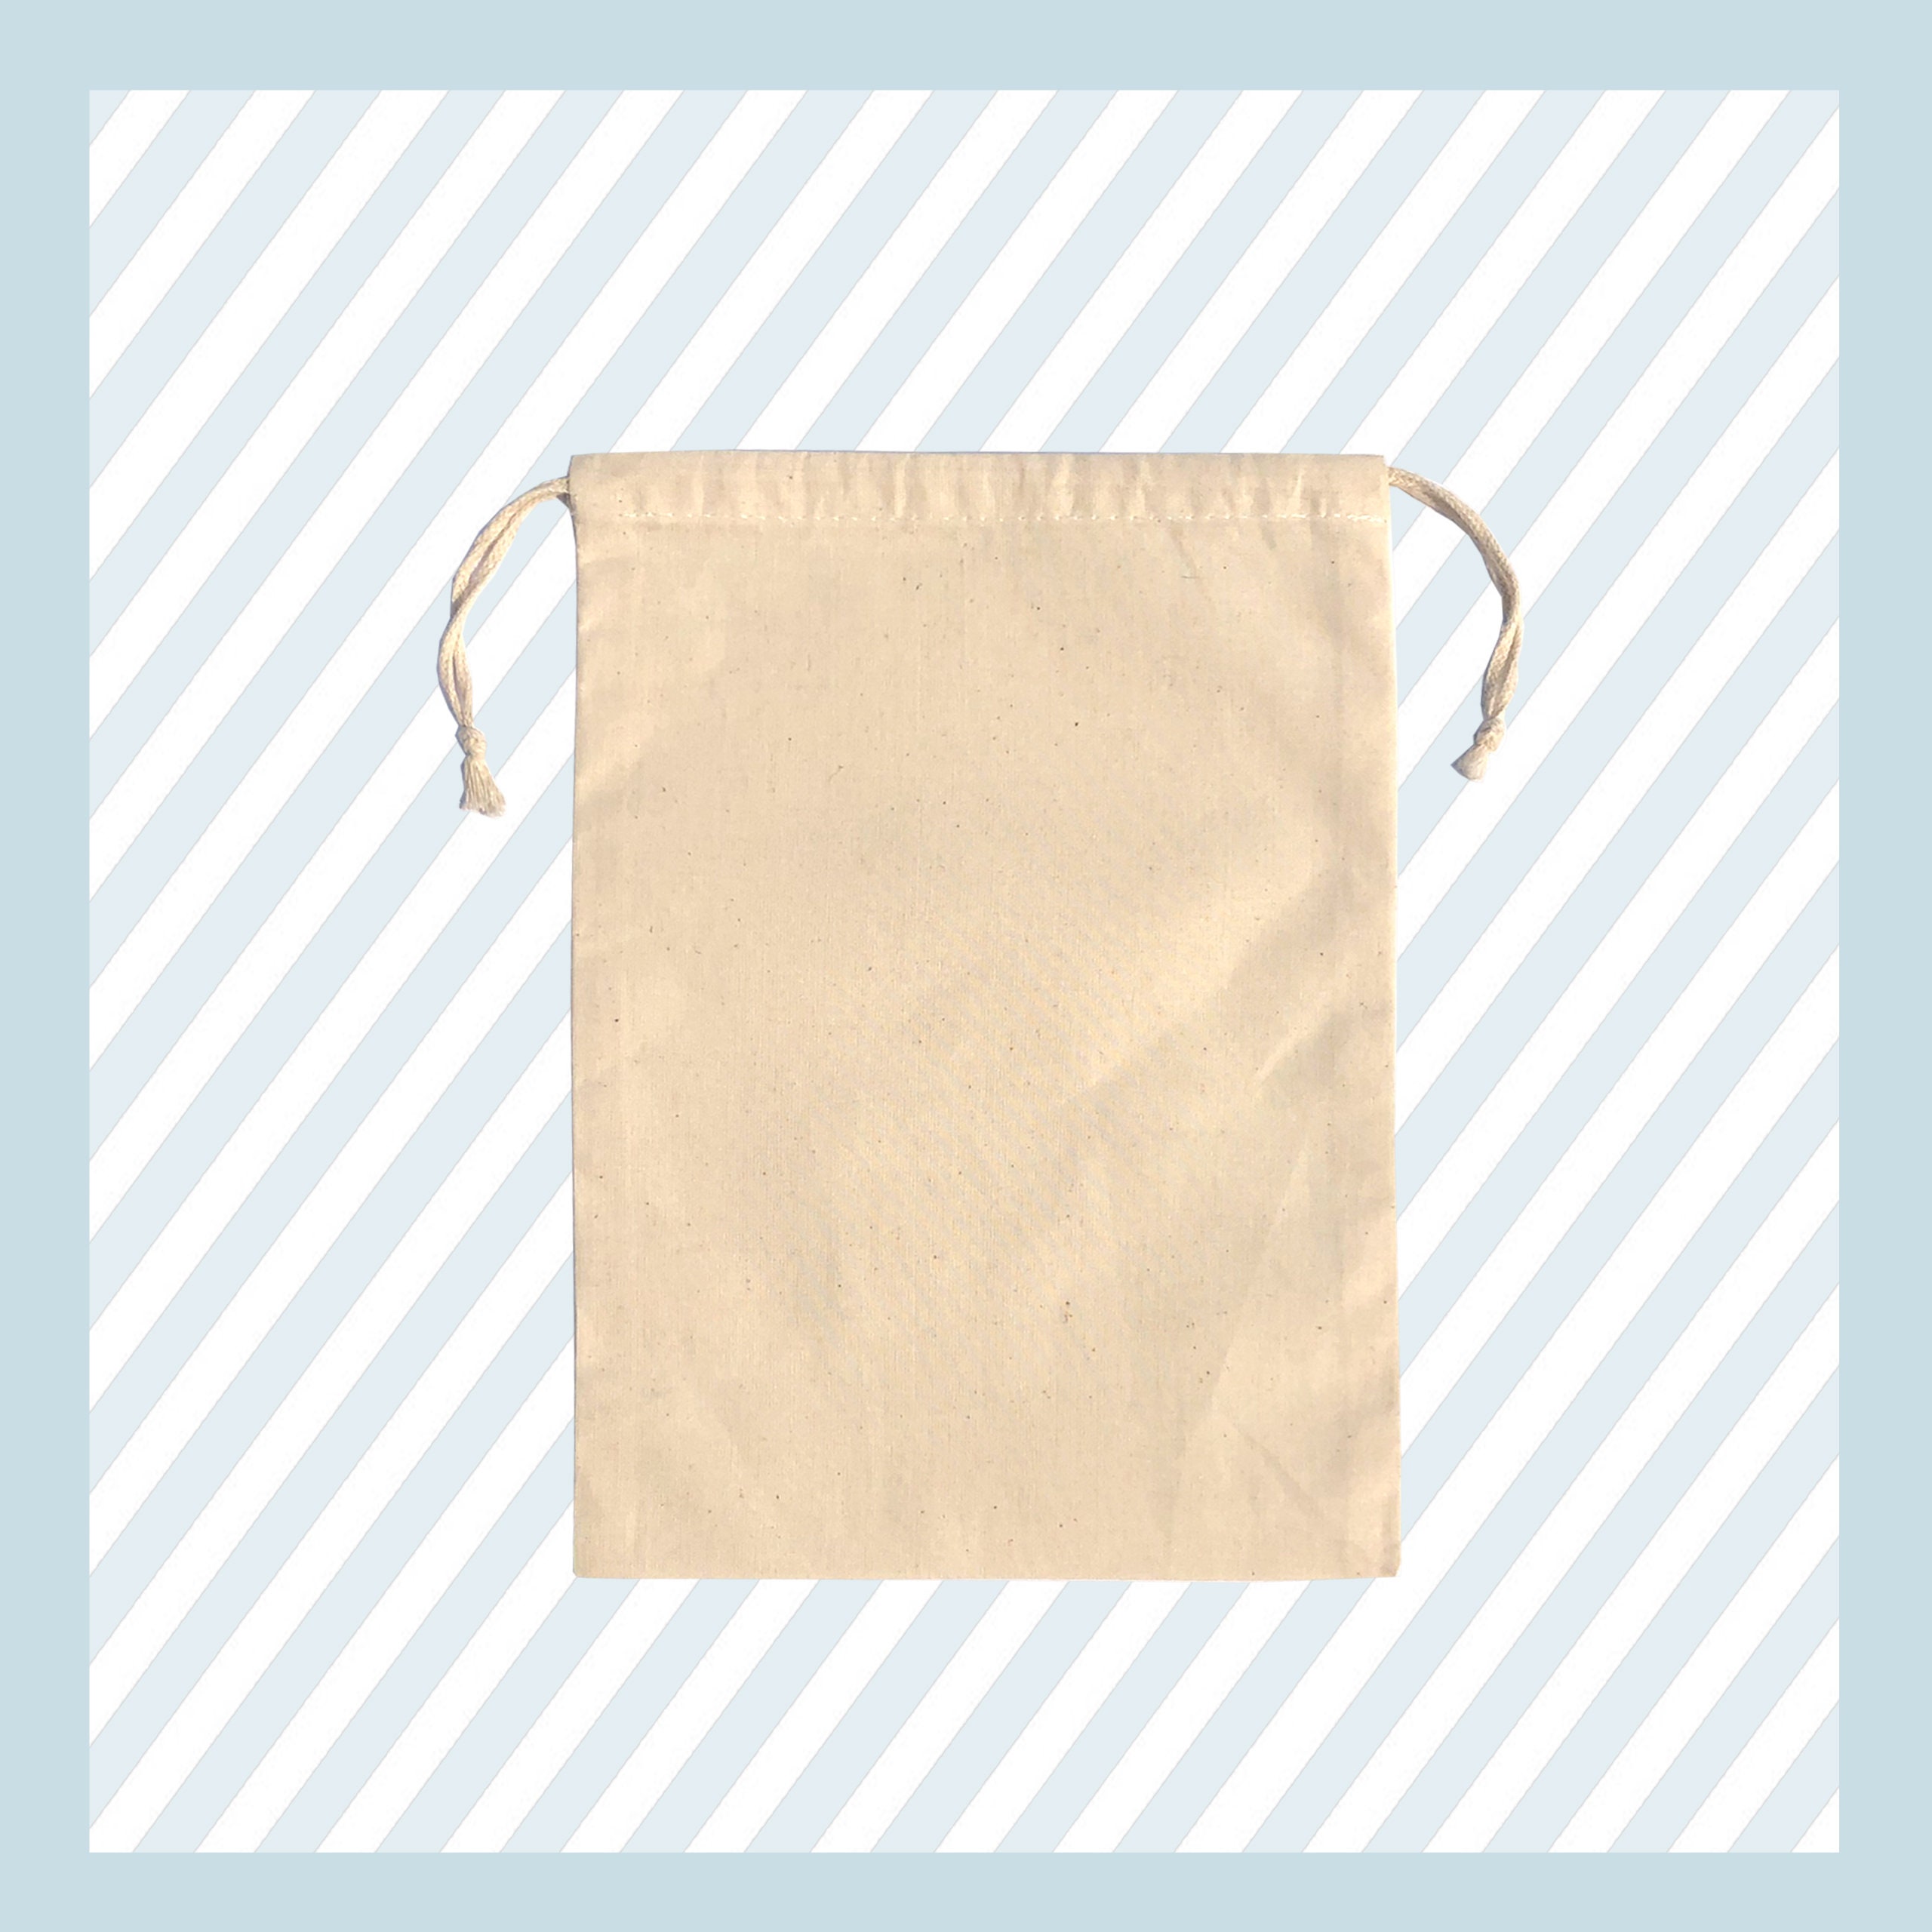 6 X 8 100% Organic Cotton Pack of 25 Biodegradable and Reusable Premium Quality Muslin Double Drawstring Bags